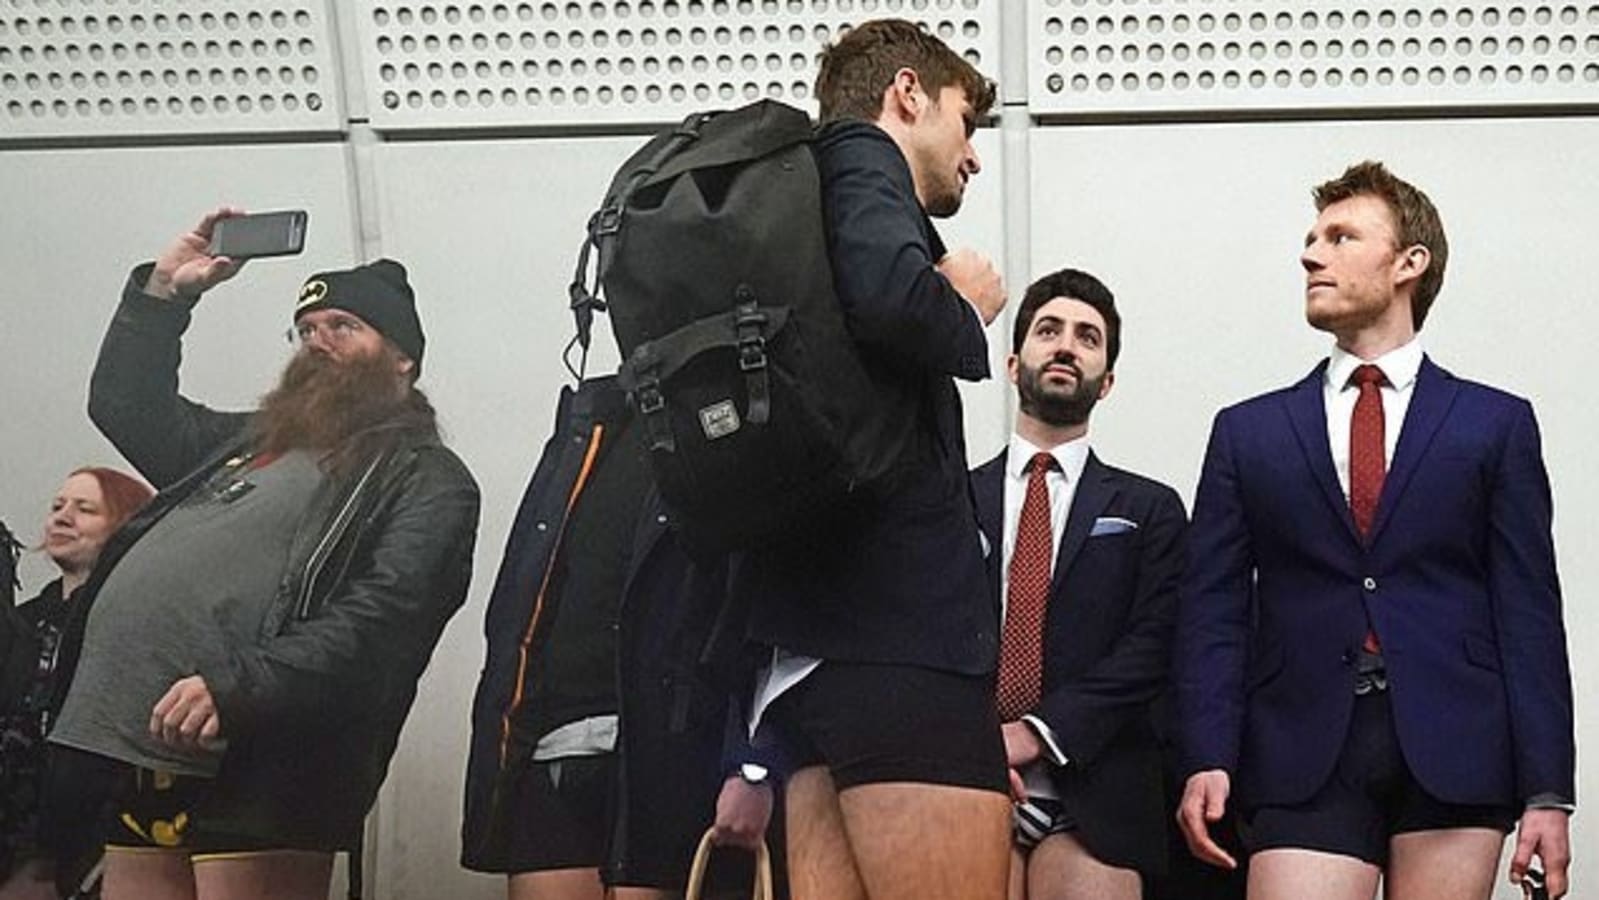 Hundreds of People in London Underground Dress Down to Underpants to  Celebrate No Trousers Tube Ride  News18